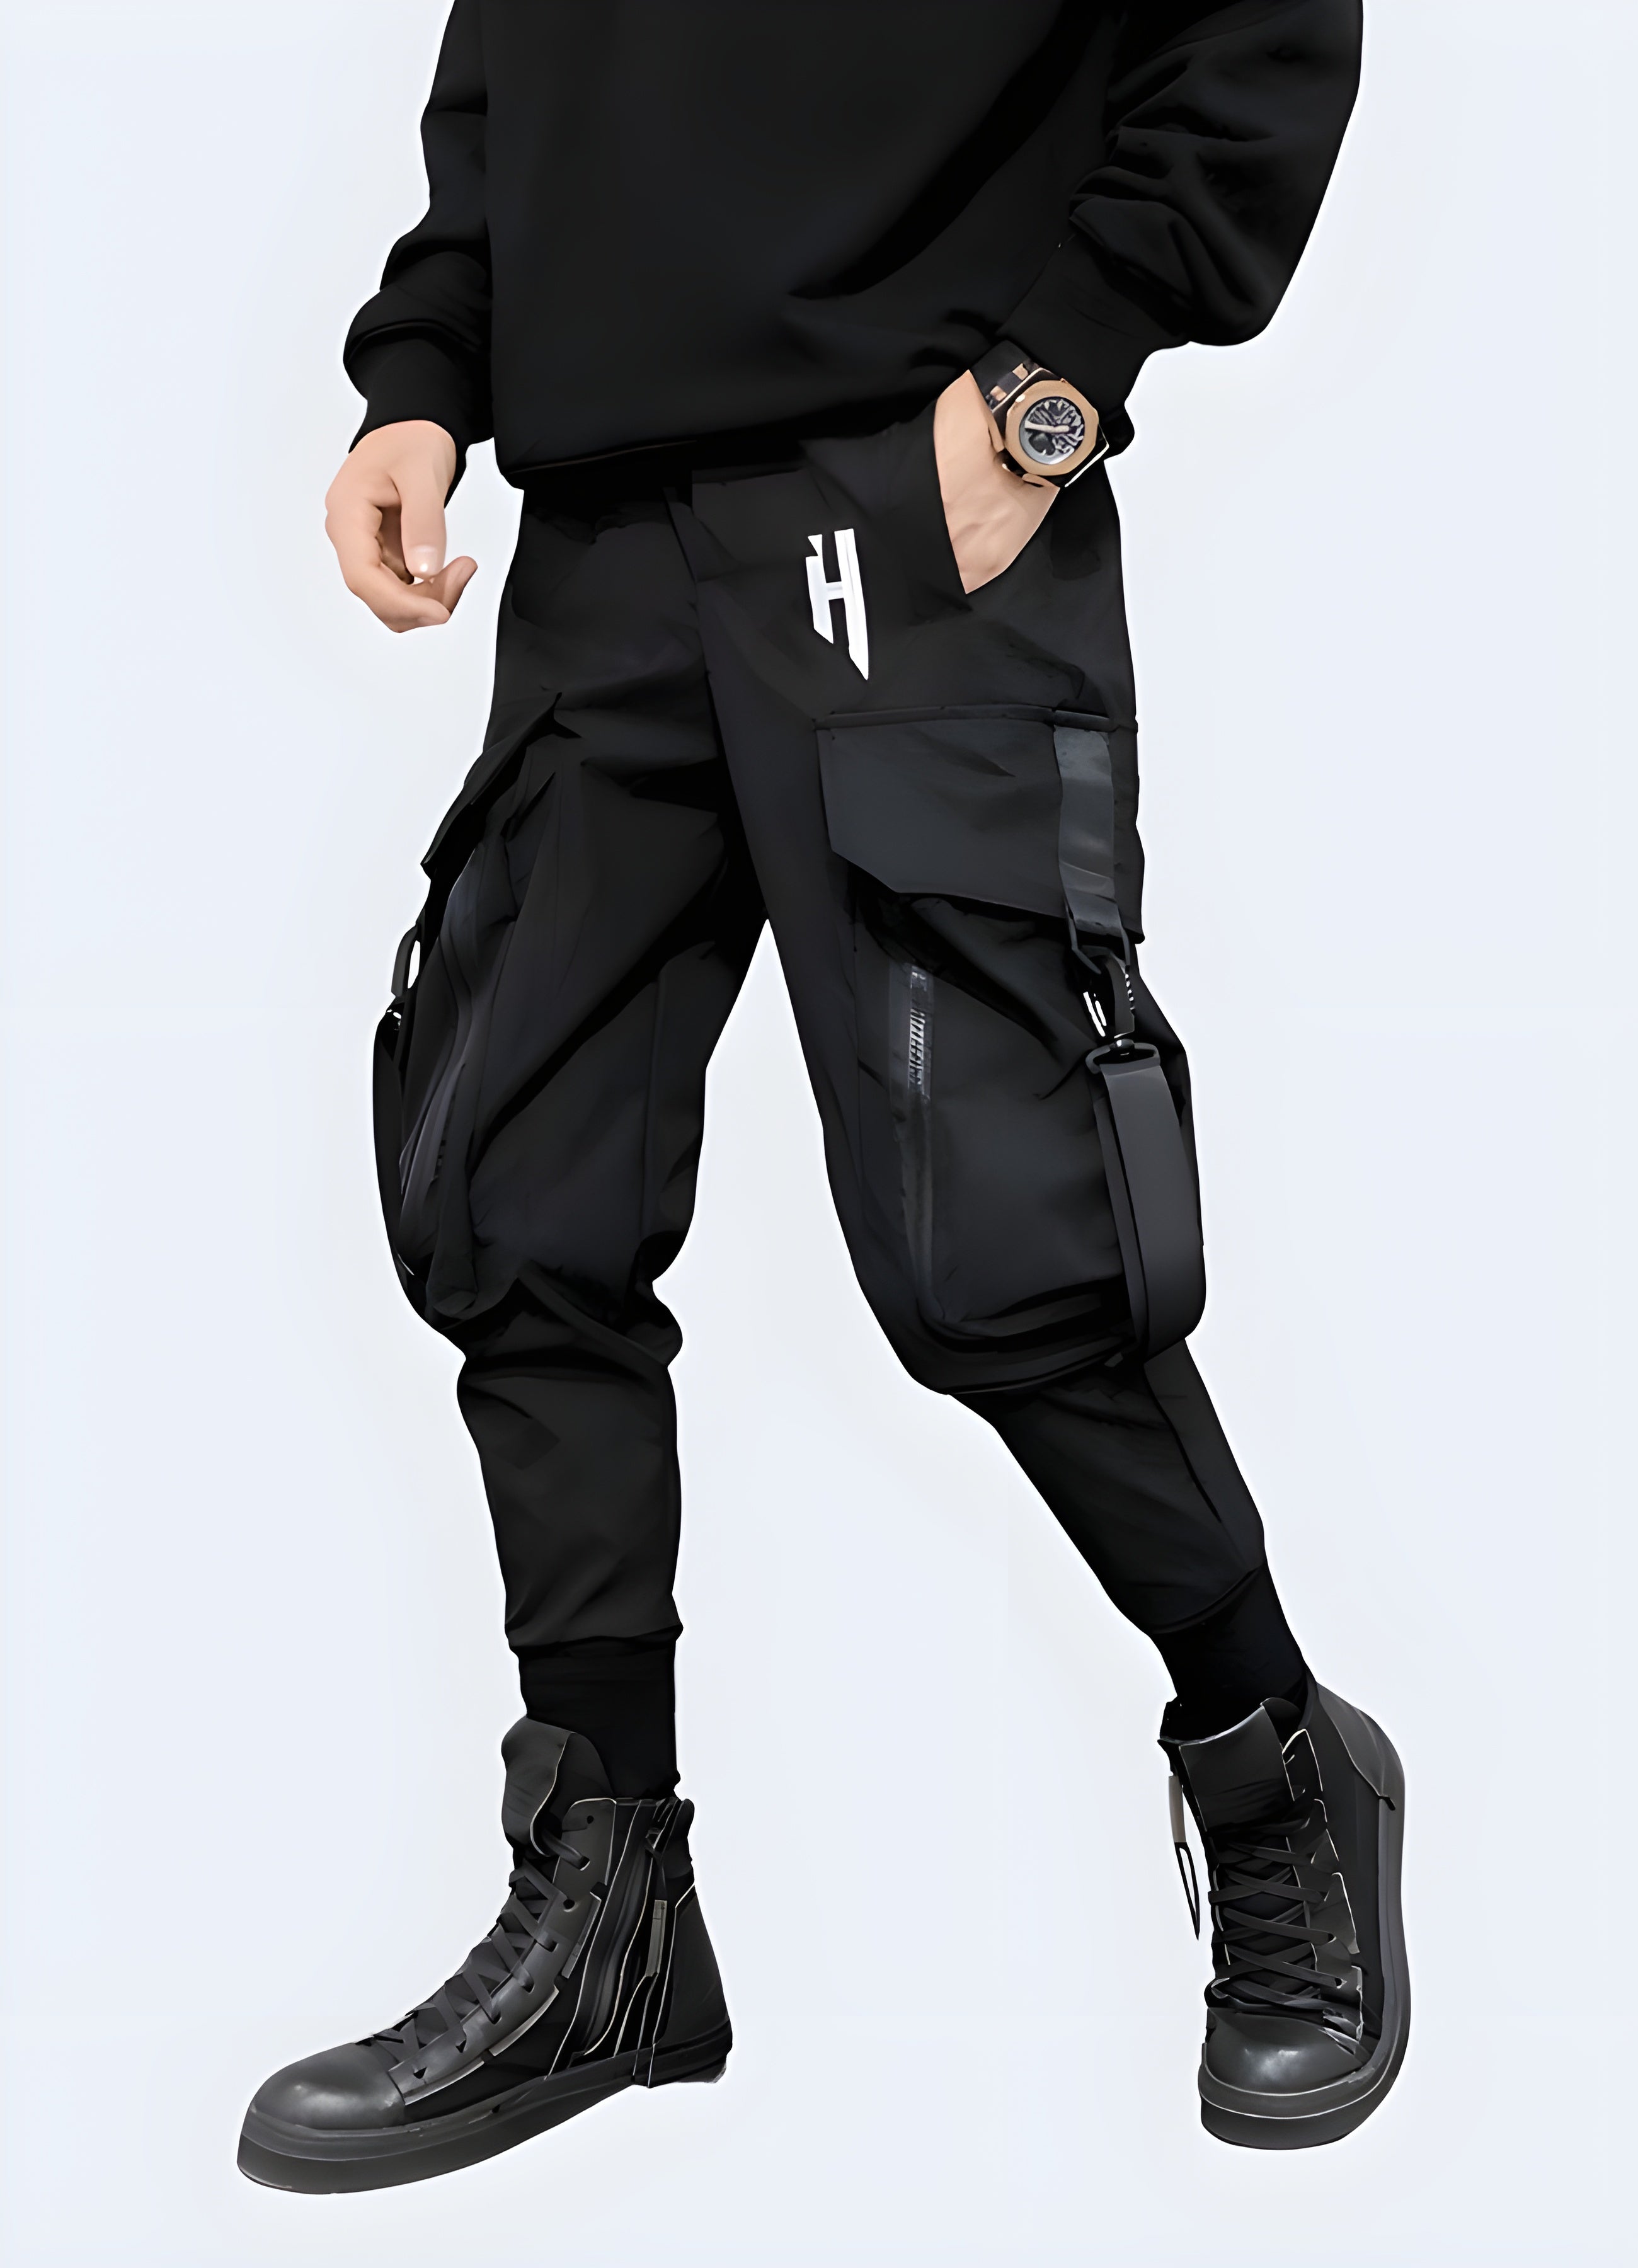 Dark cargo pants for everyday comfort and style. Multiple pockets offer sample storage.